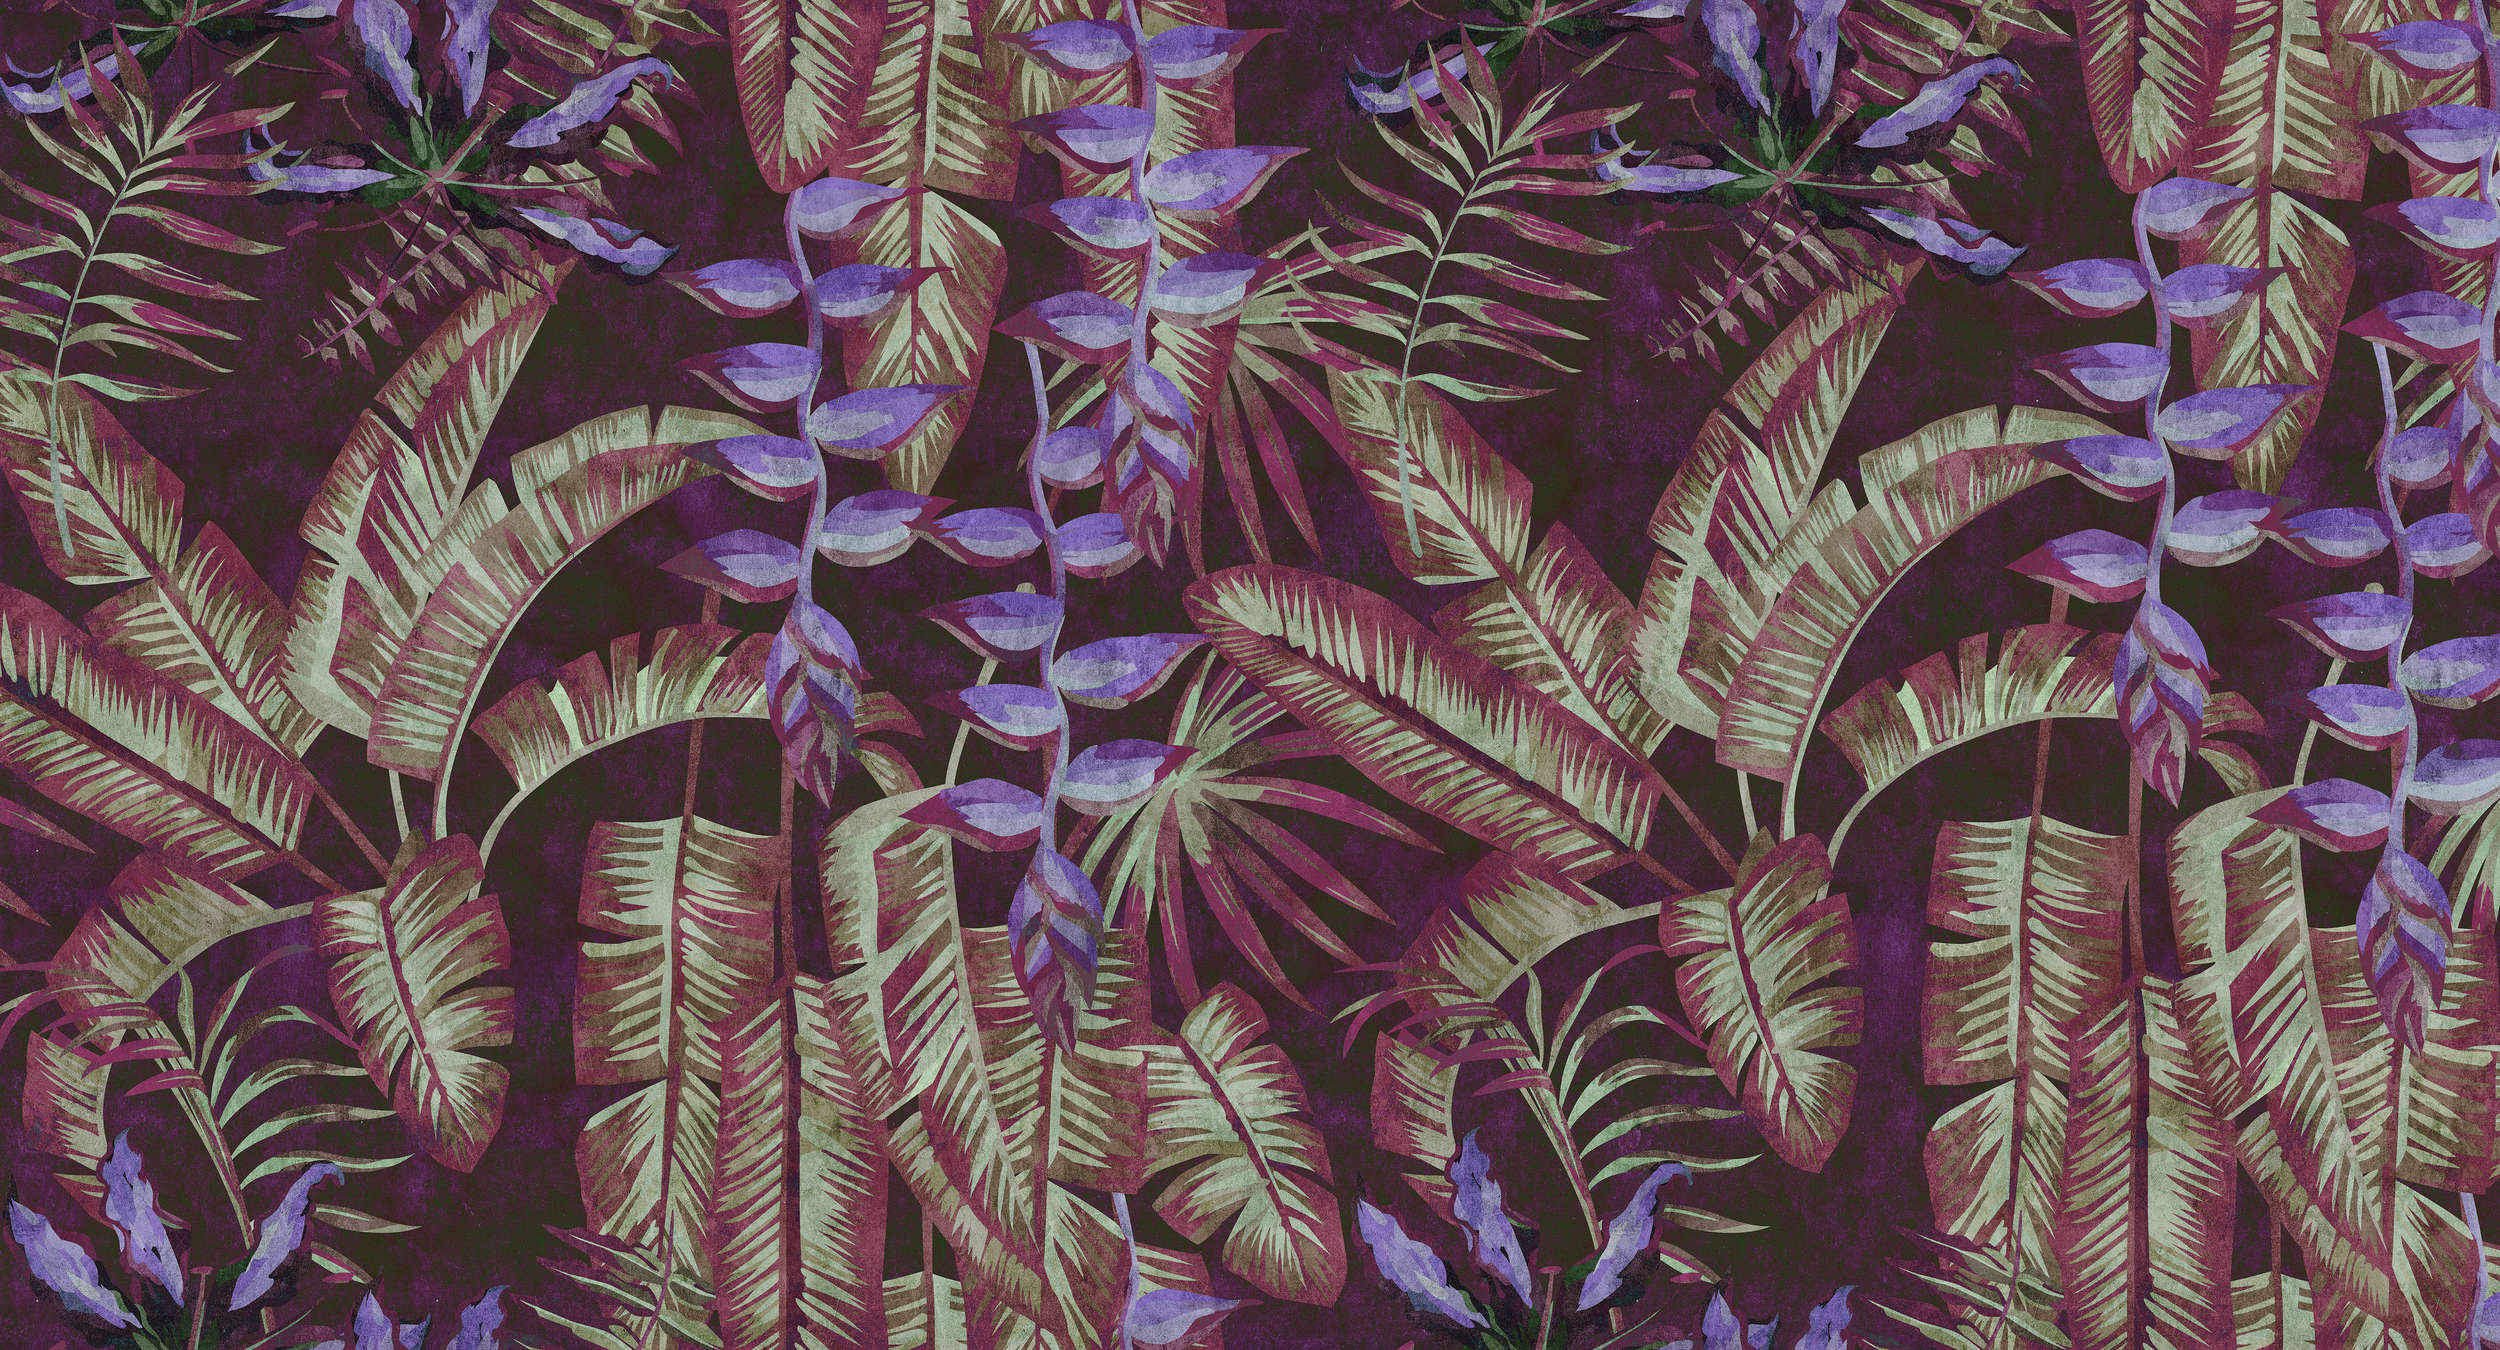             Tropicana 3 - Tropical wallpaper in blotting paper structure with leaves & ferns - Red, Purple | Matt smooth fleece
        